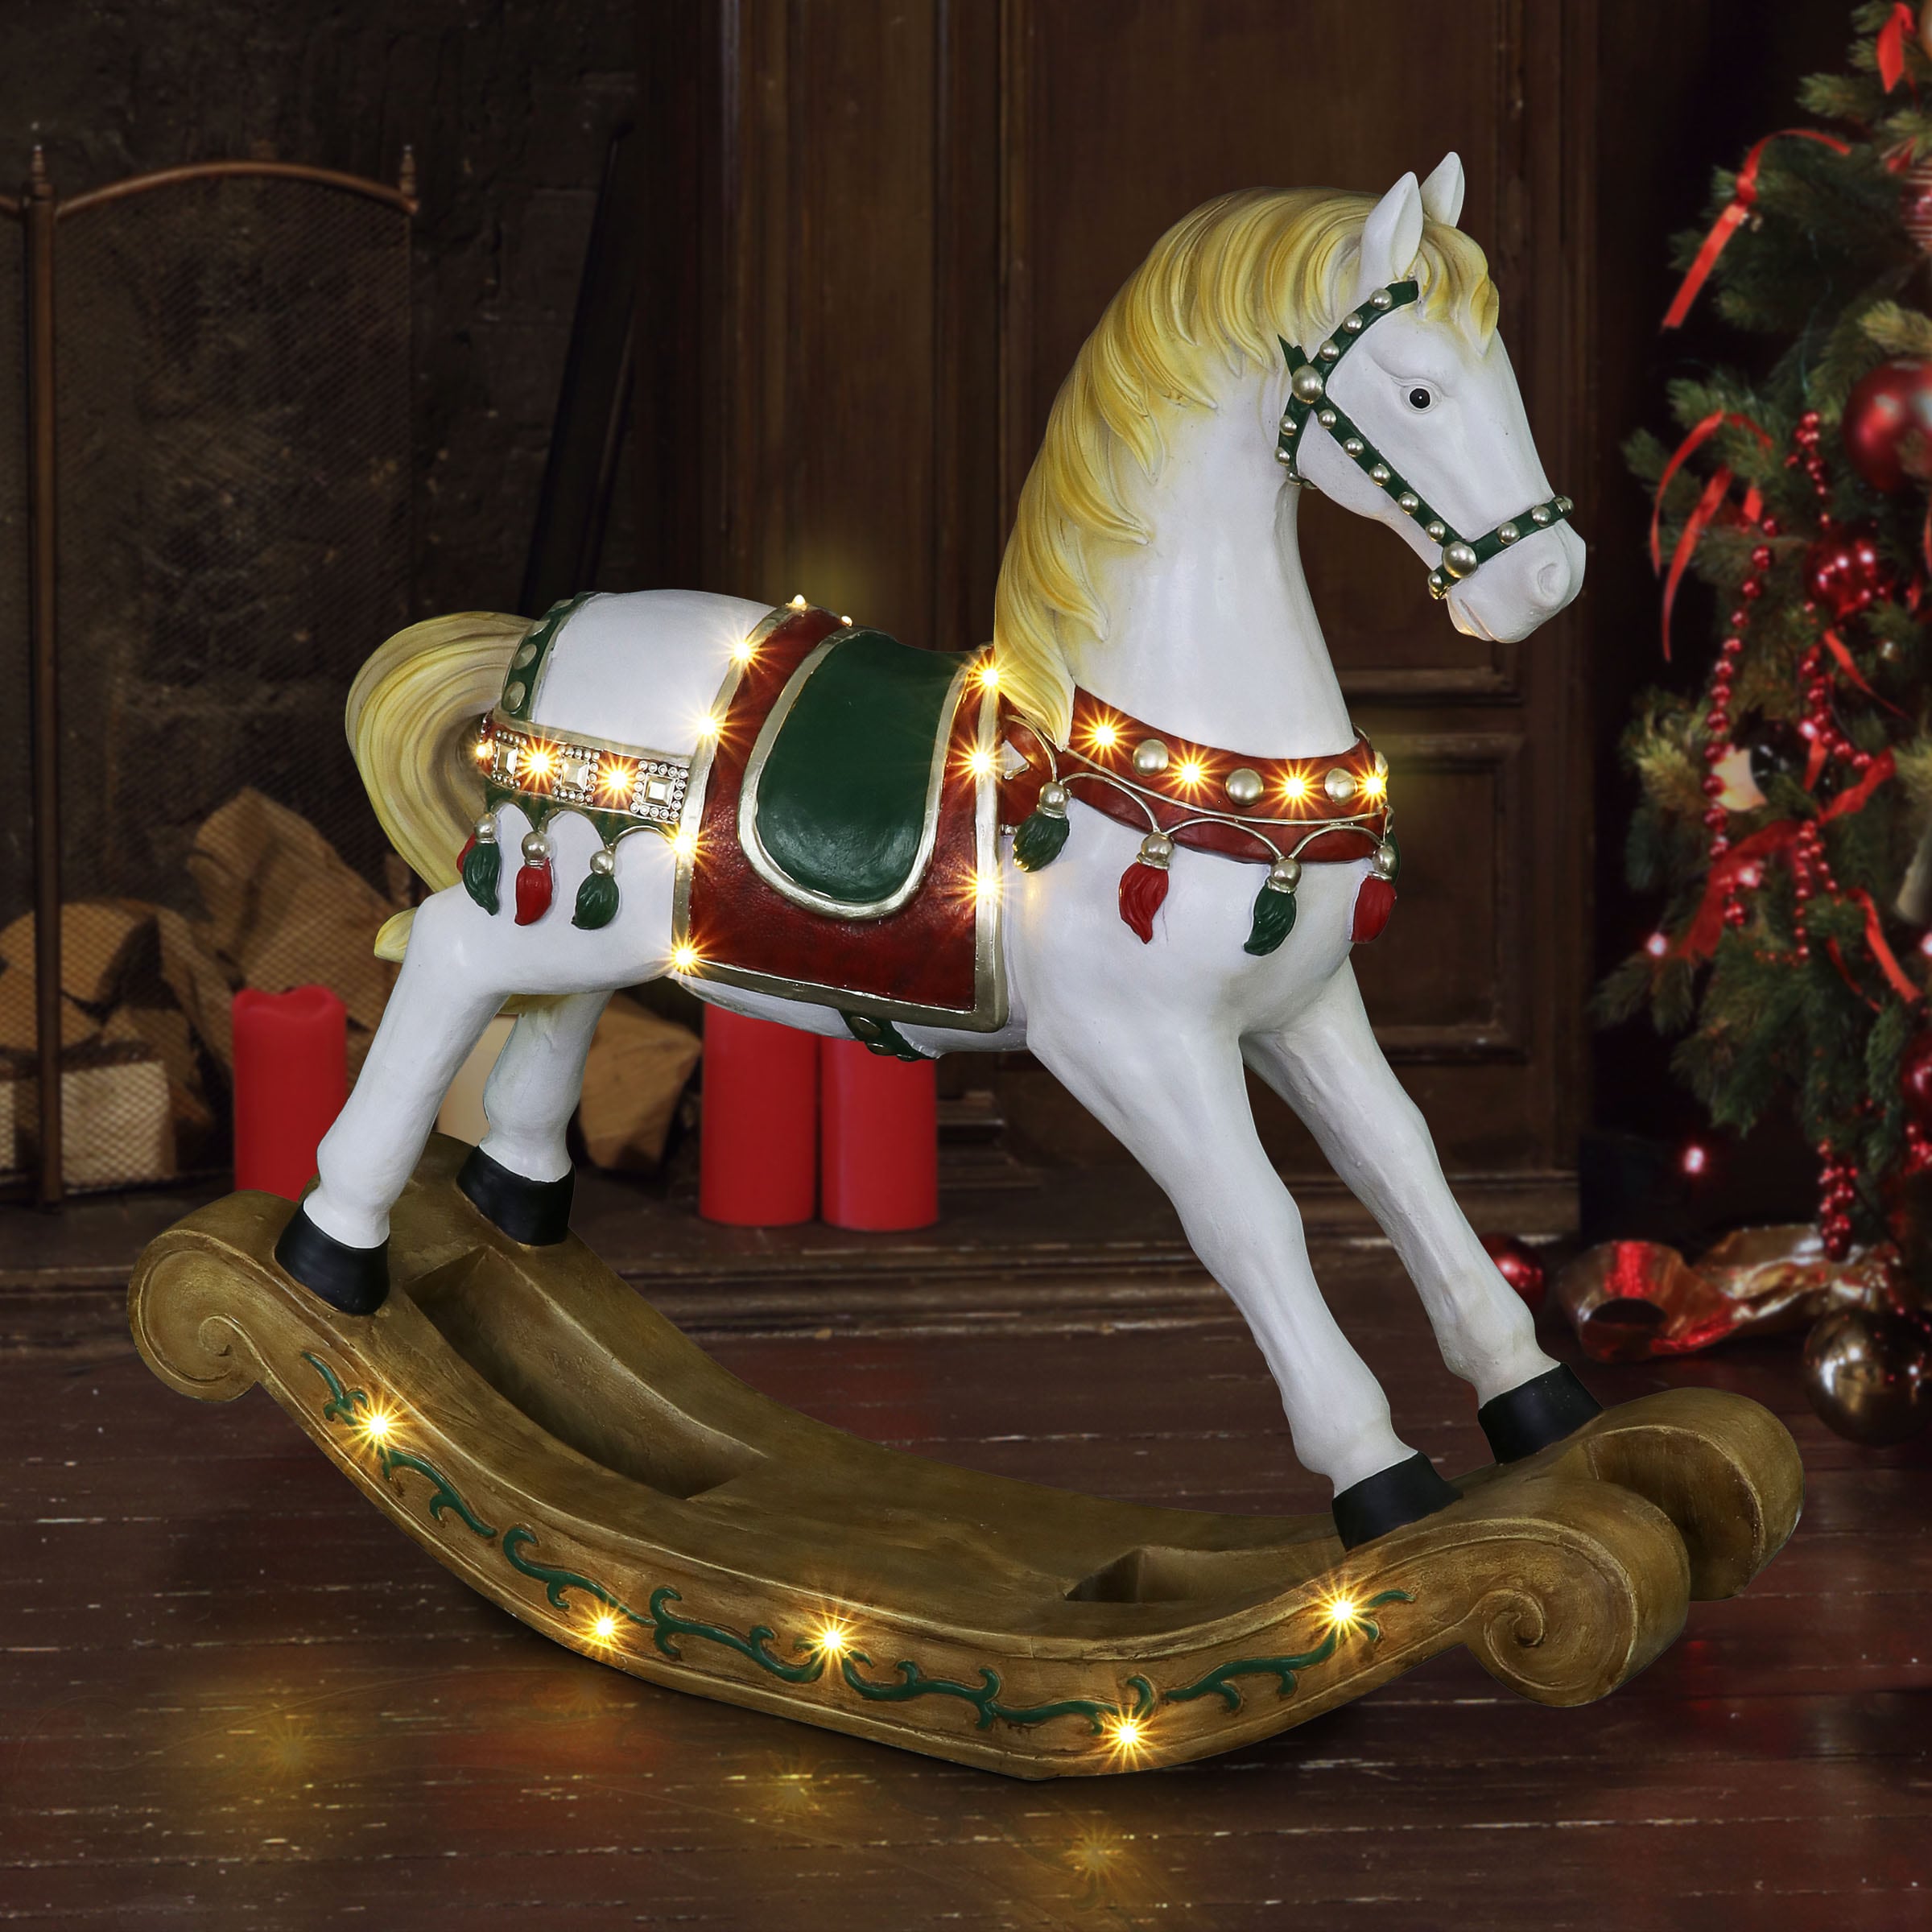 Details about   Christmas Decorations Christmas Wooden Rocking Horses Christmas Gifts Presen Jc 